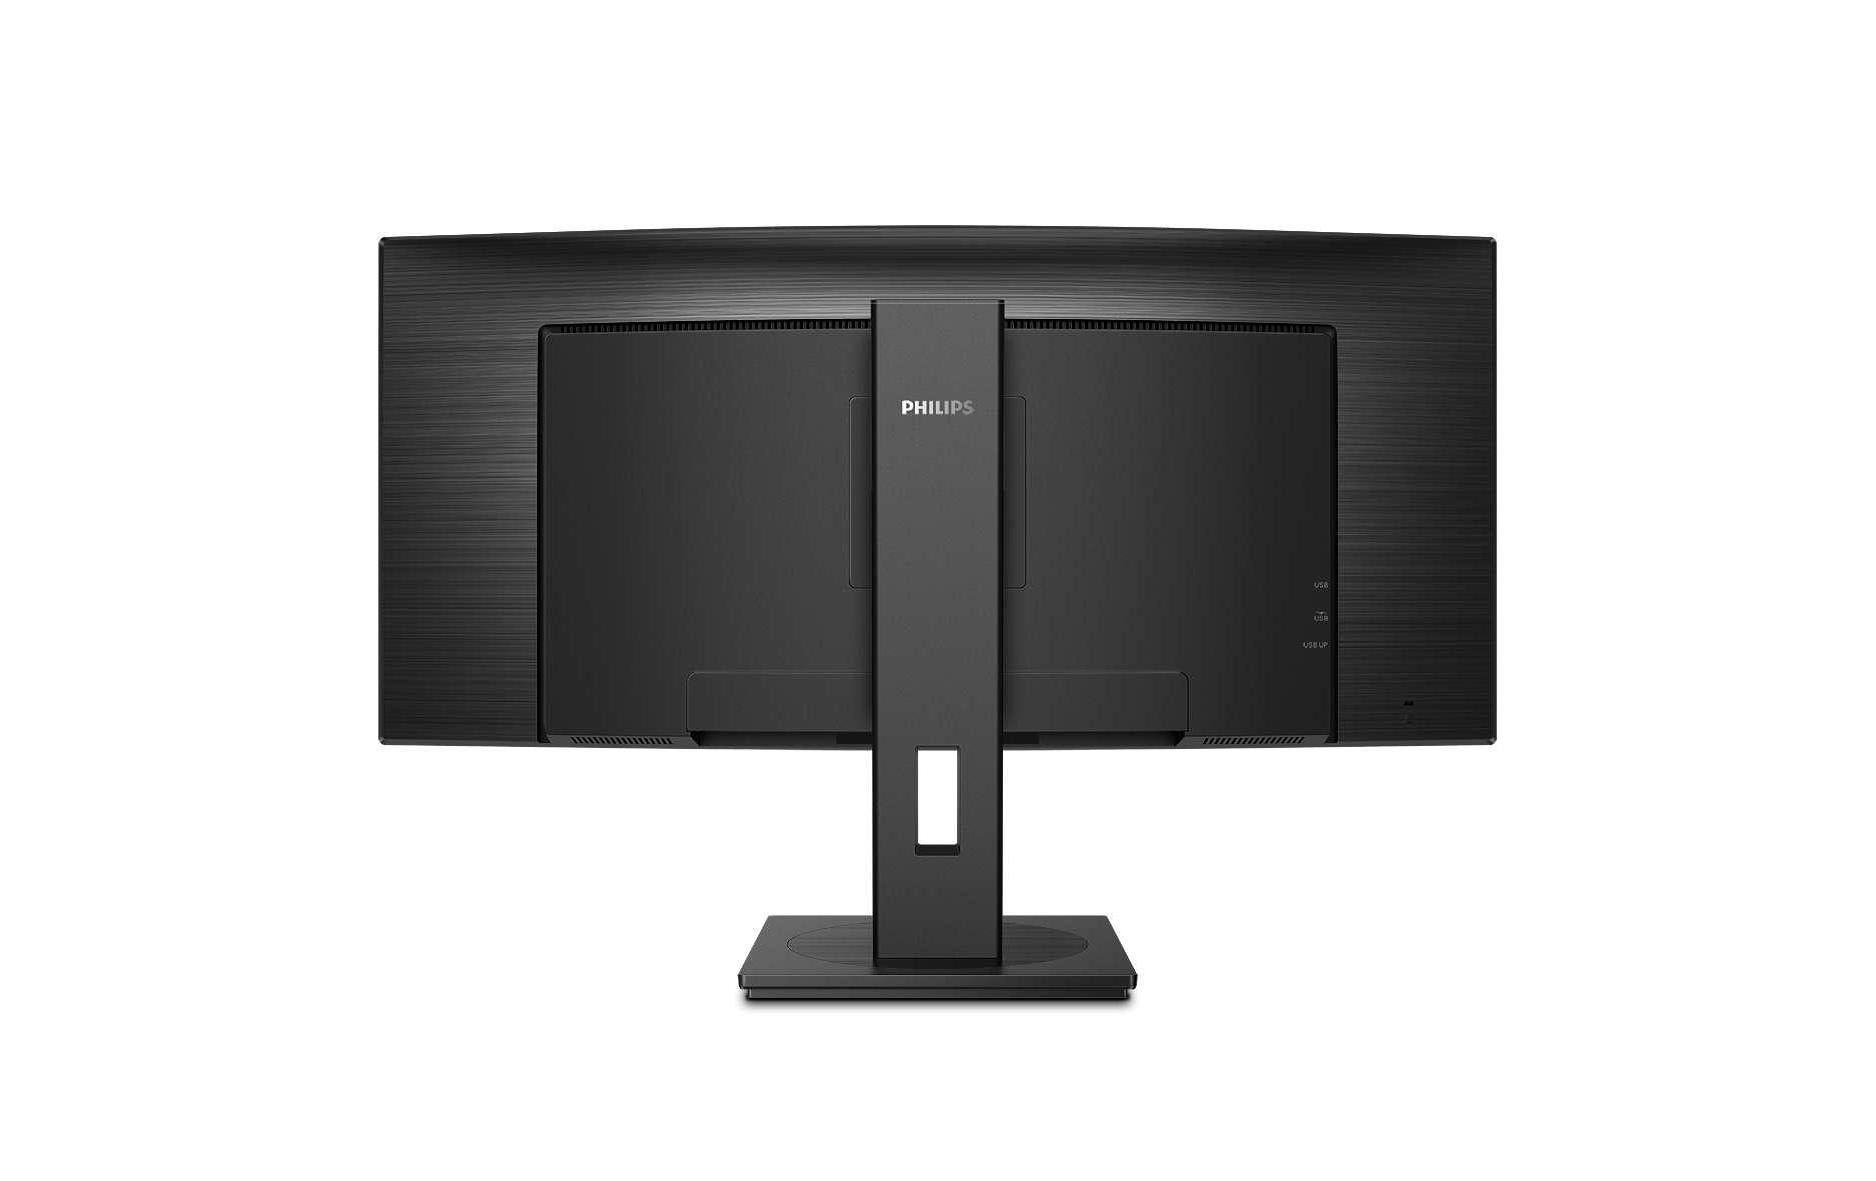 Philips Curved-LED-Monitor »345B1C/00«, 86,02 cm/34 Zoll, 3440 x 1440 px, UWQHD, 5 ms Reaktionszeit